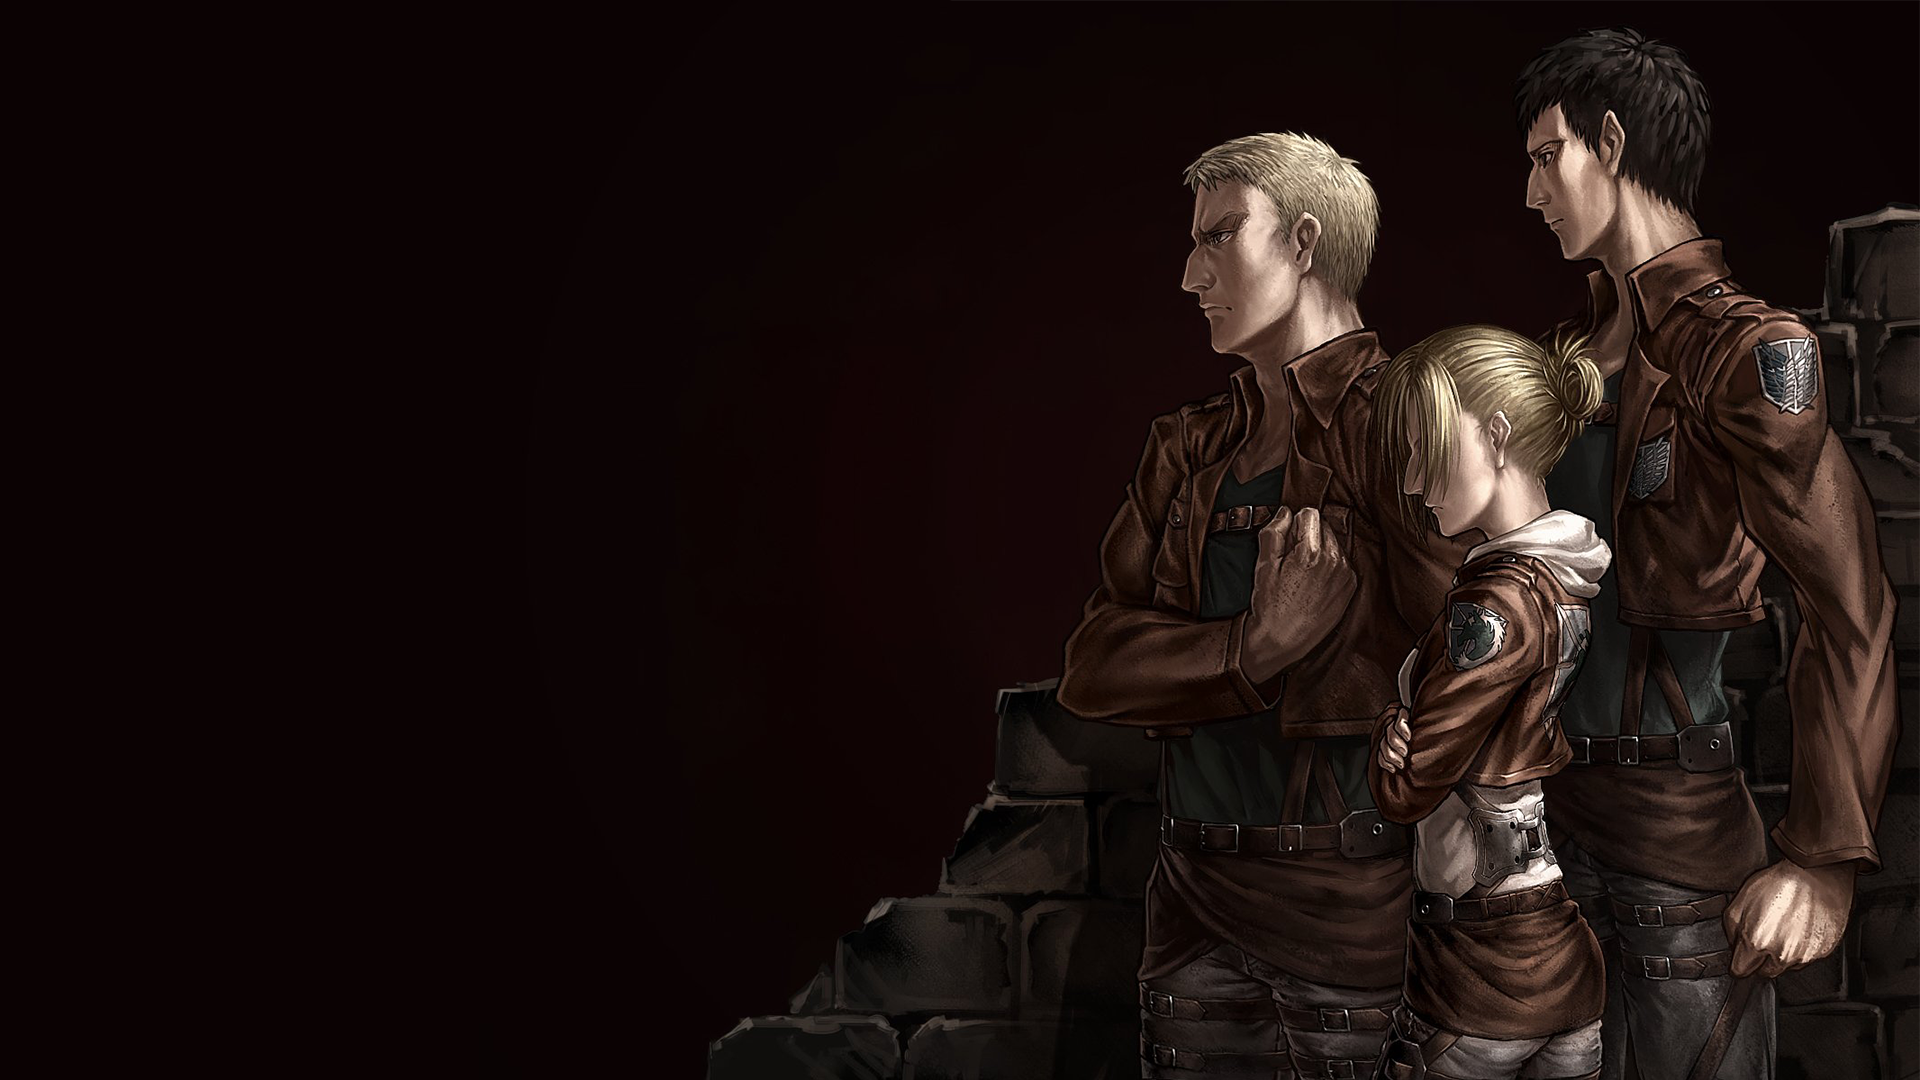 Reiner, Annie, and Bertholdt (1920x1080) HD Wallpaper From